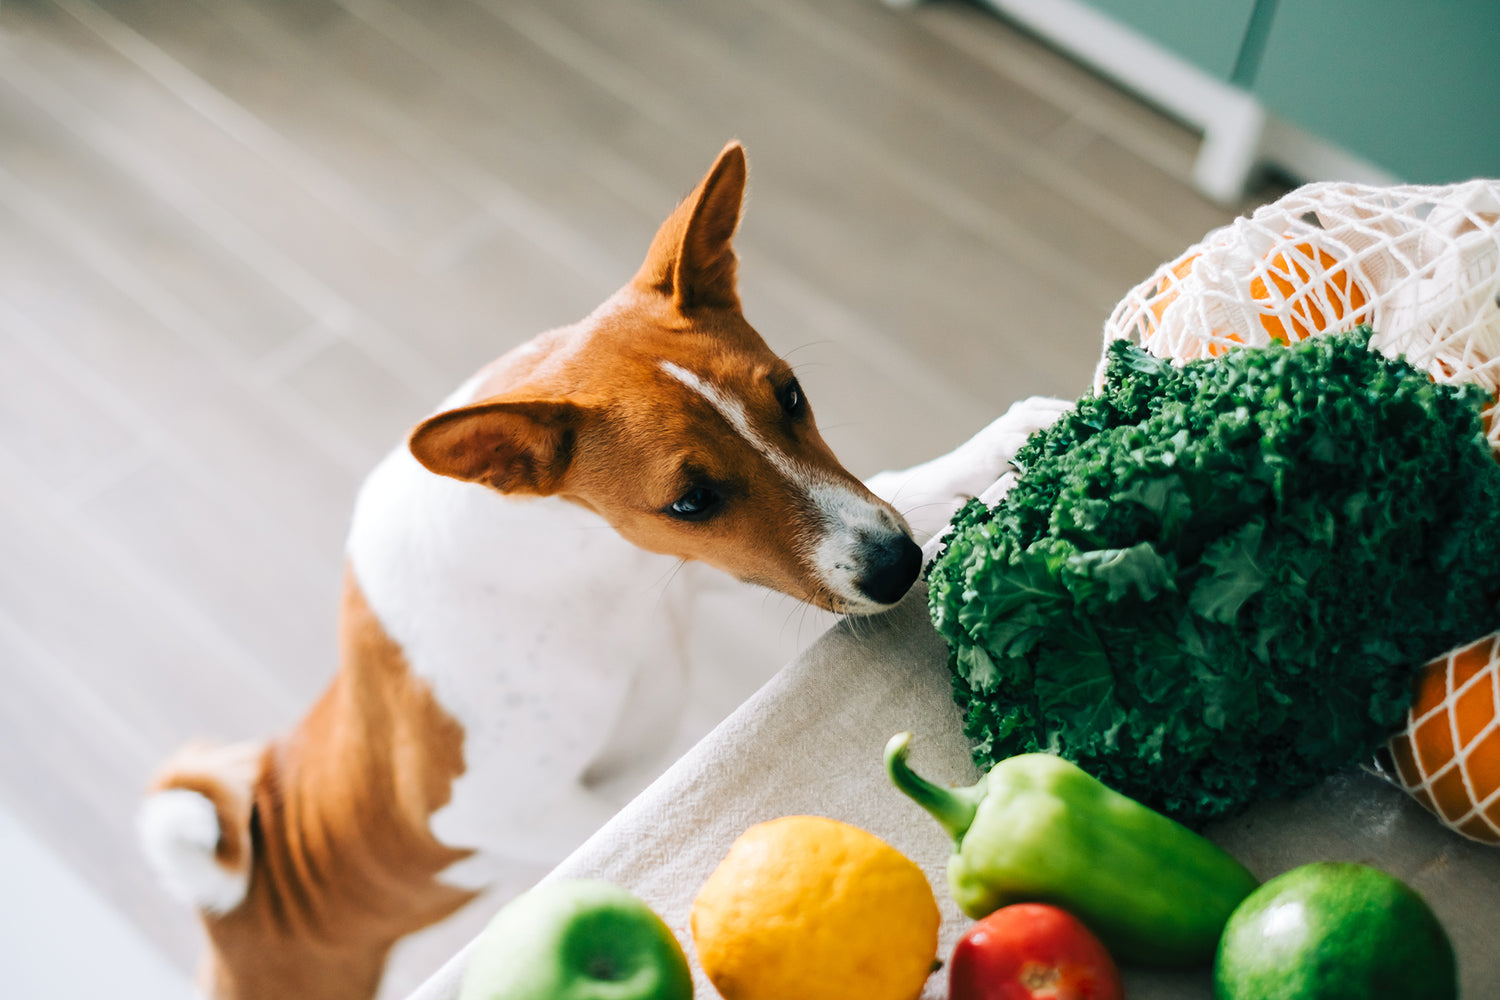 The Top 10 Best Vegetables That Are Safe for Dogs